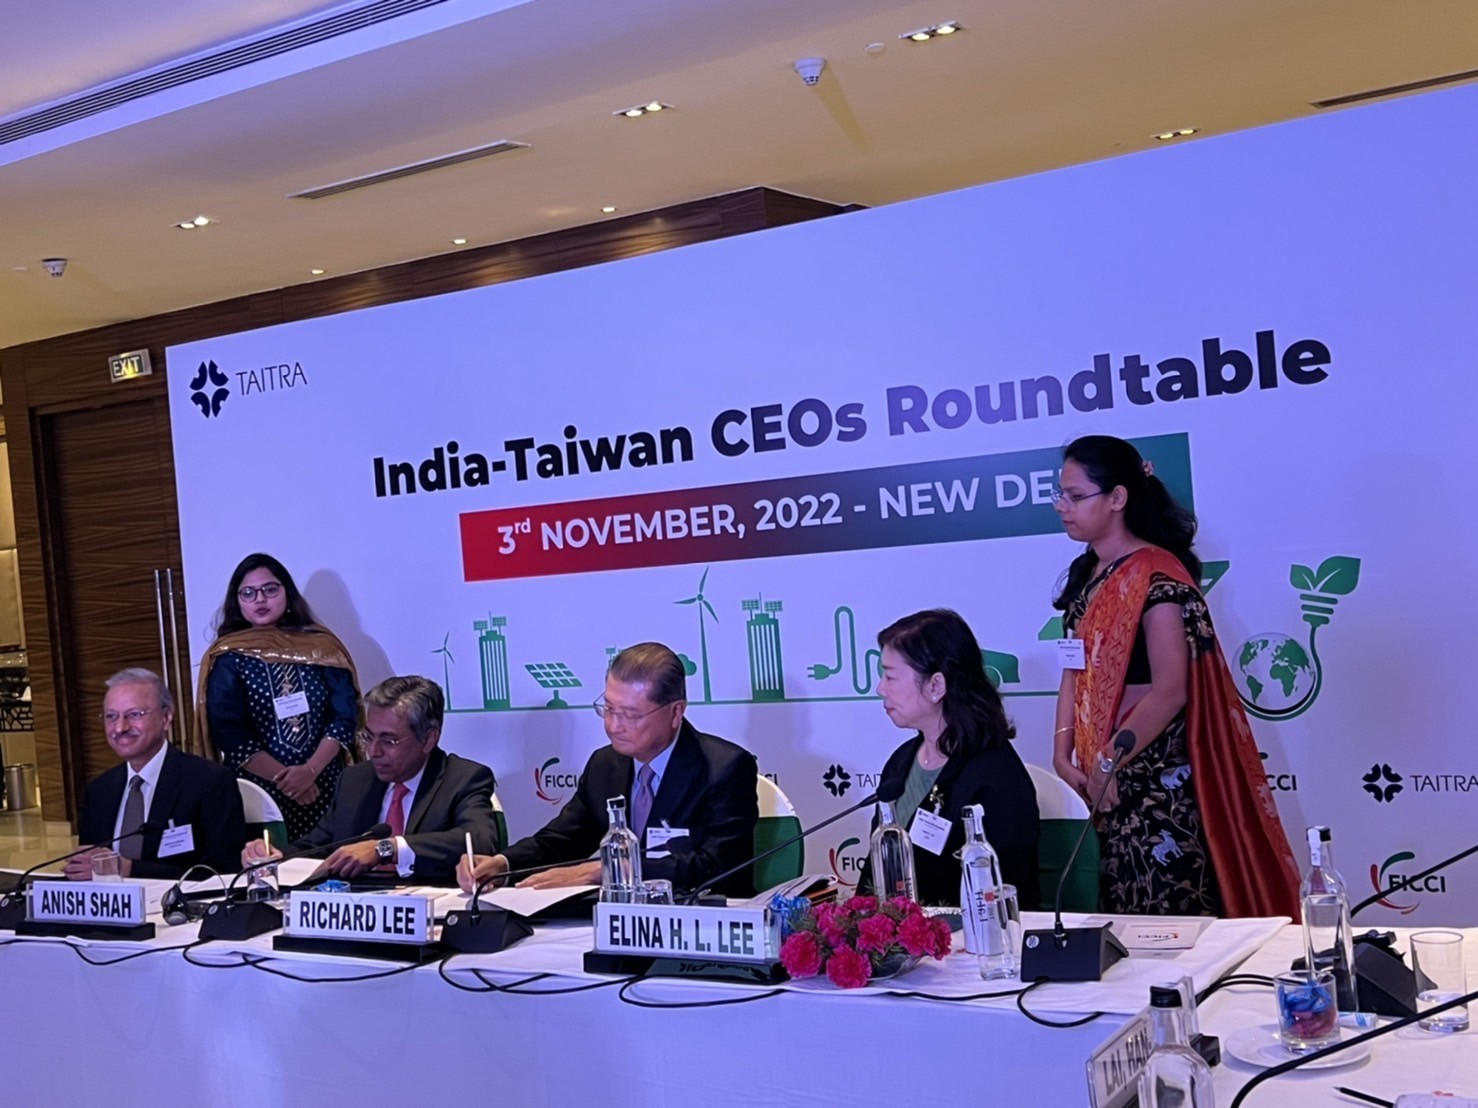 Successful Results of the CEO Roundtable and Industrial Collaboration Summit between Taiwan and India